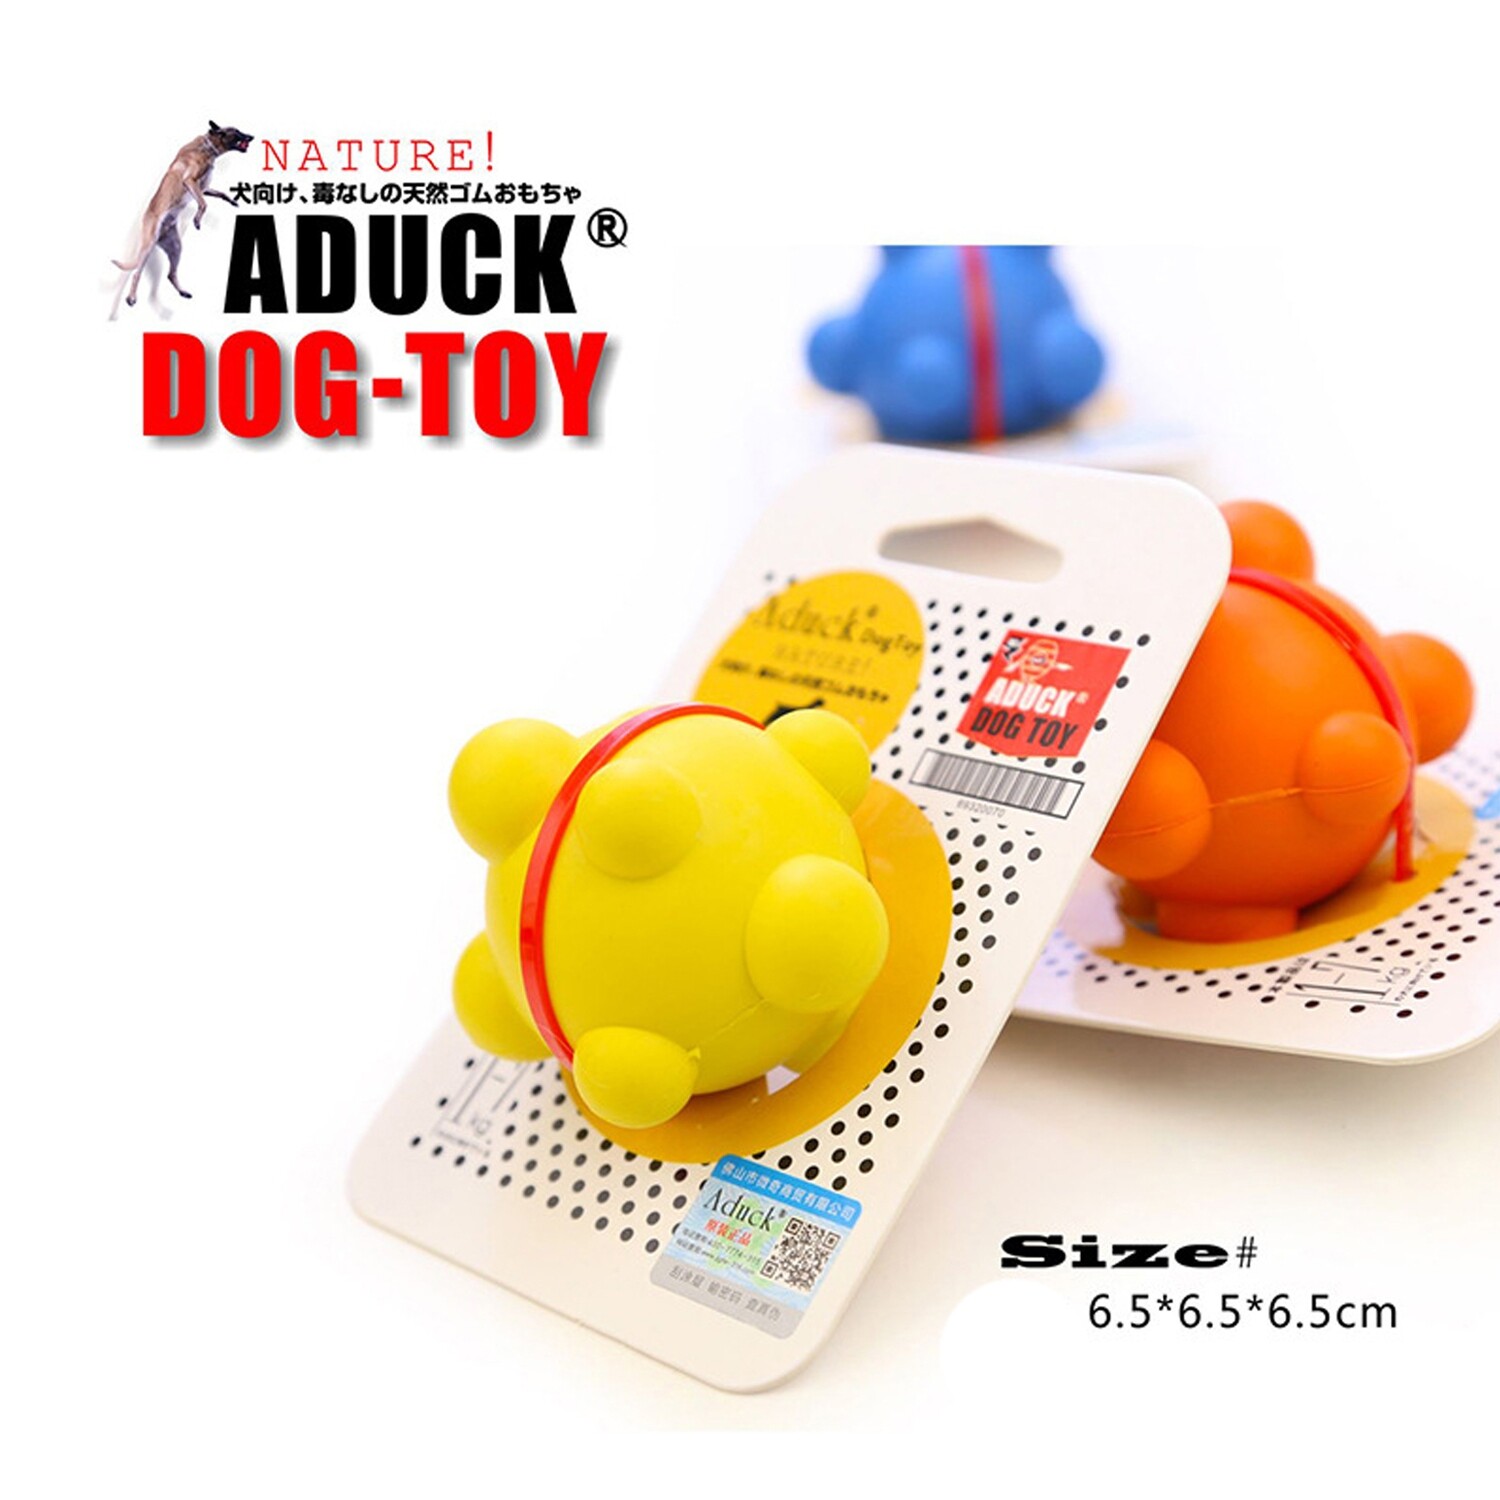 Aduck pet rubber bouncy ball dog toys - 狗狗橡胶弹力球玩具